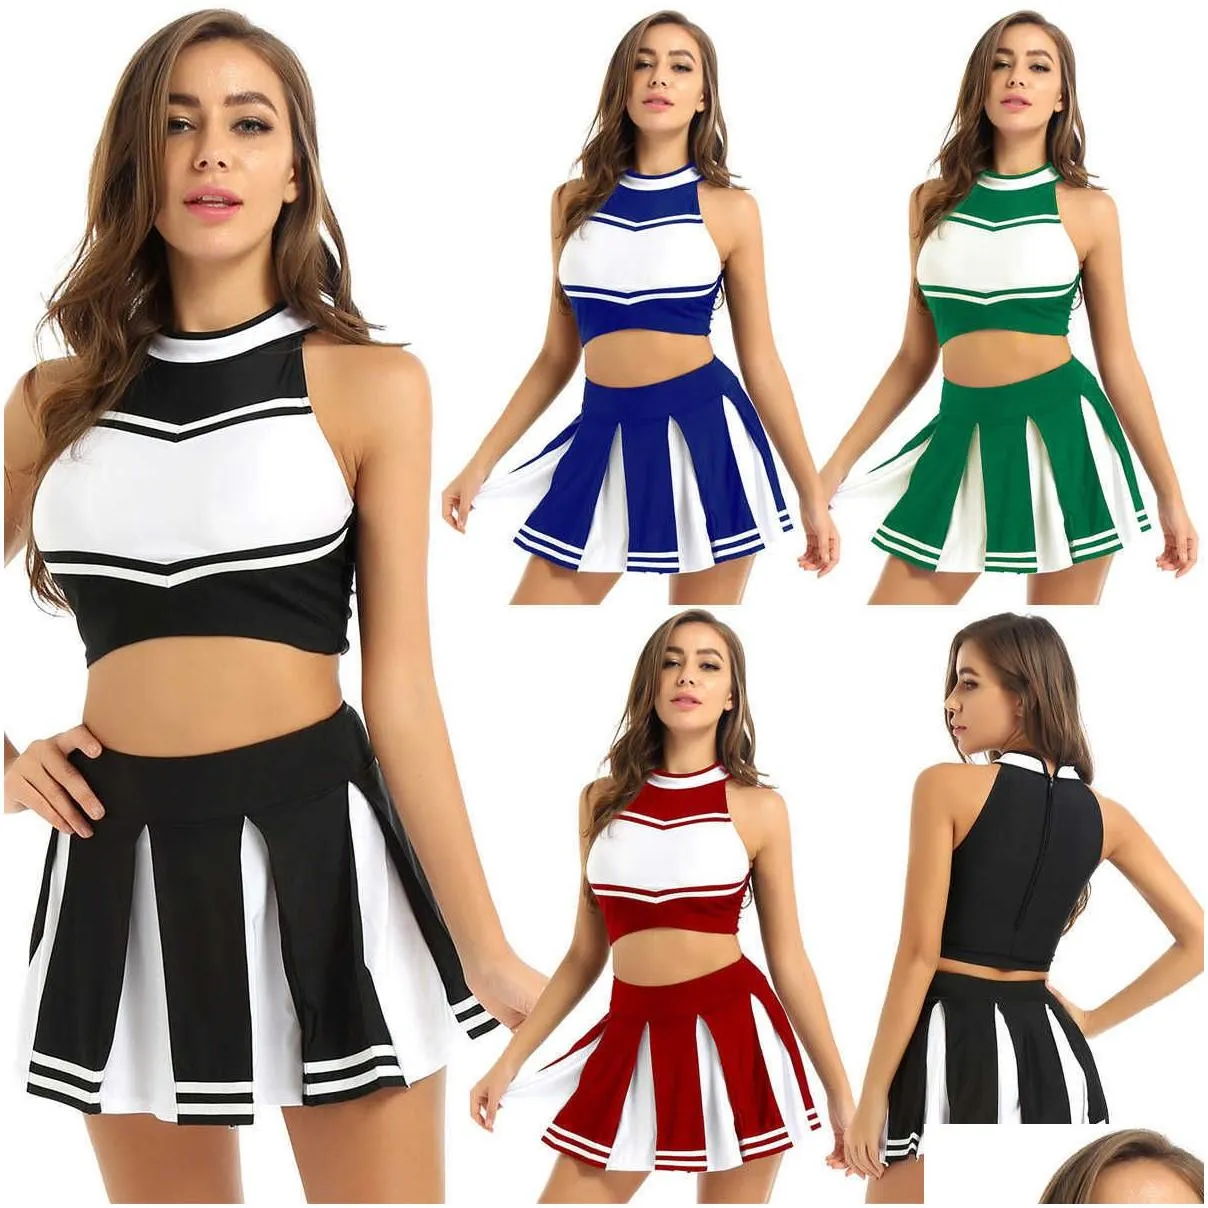 Women Adults School Girls Outfits Cheerleader Sexy Costume Sets Uniform Outfit Sleeveless Crop Top with Mini Pleated Skirt X0626